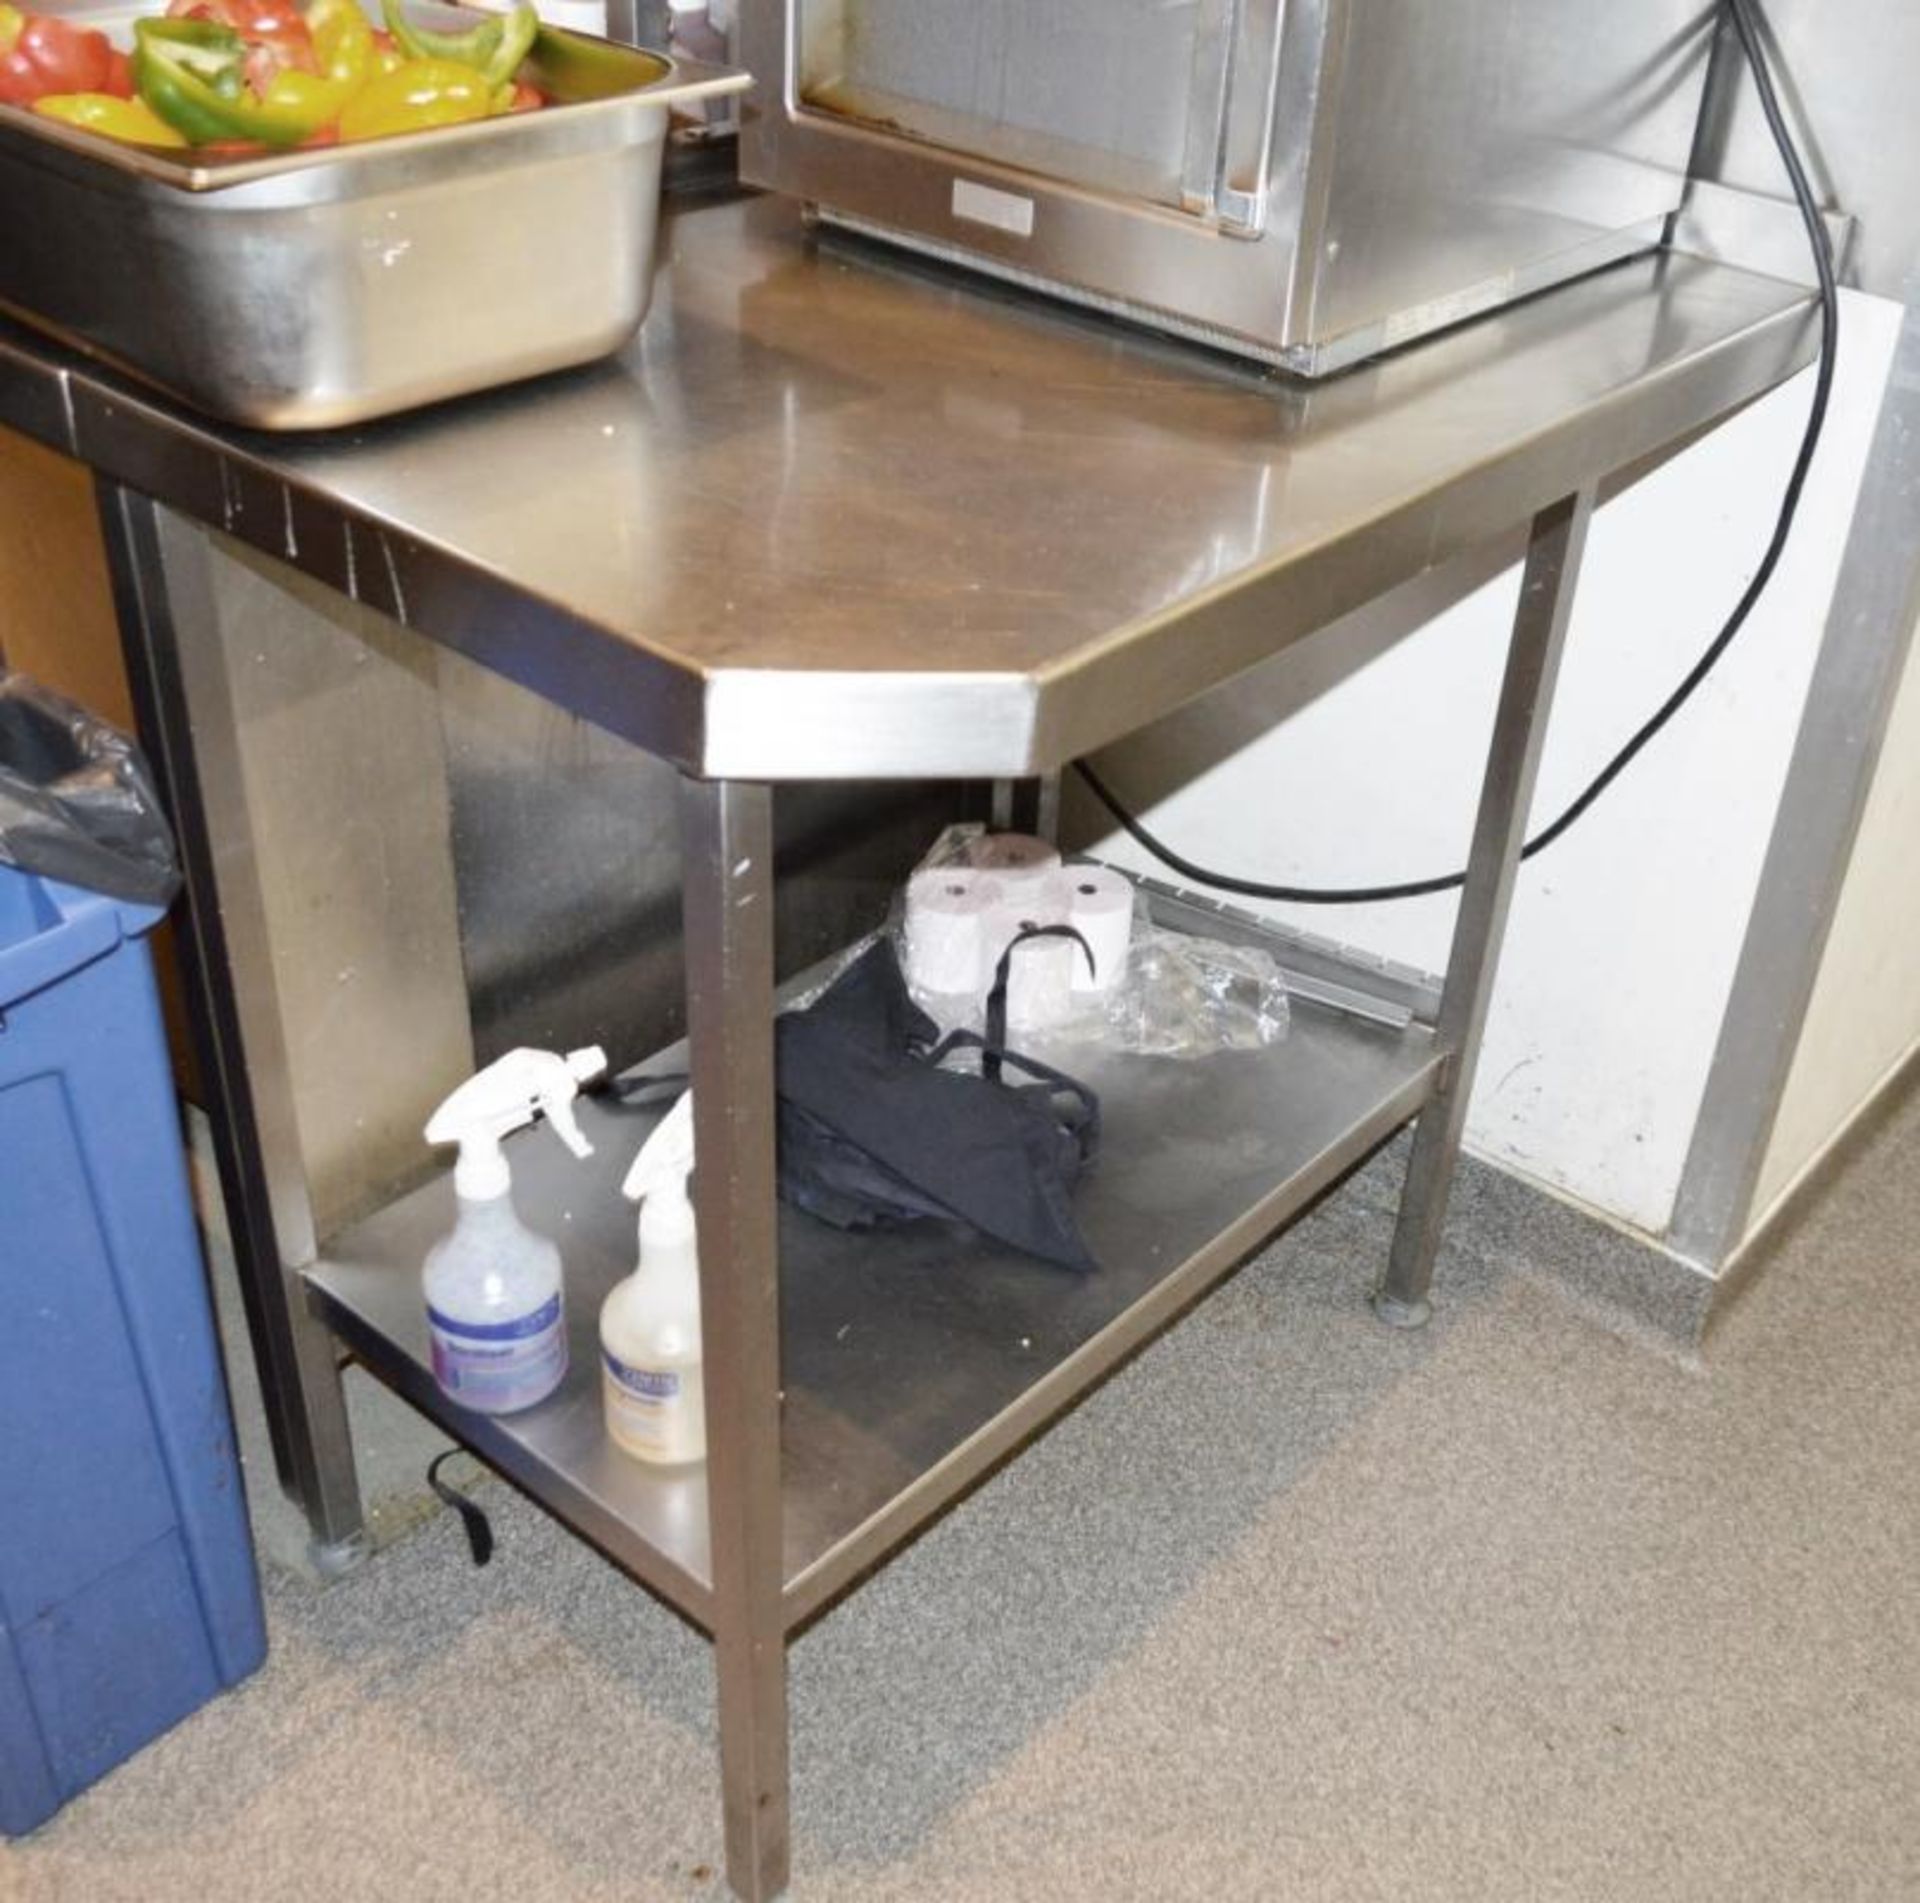 1 x Stainless Steel Commercial Corner / End Prep Table With Under Shelf - Dimensions (approx): 188 x